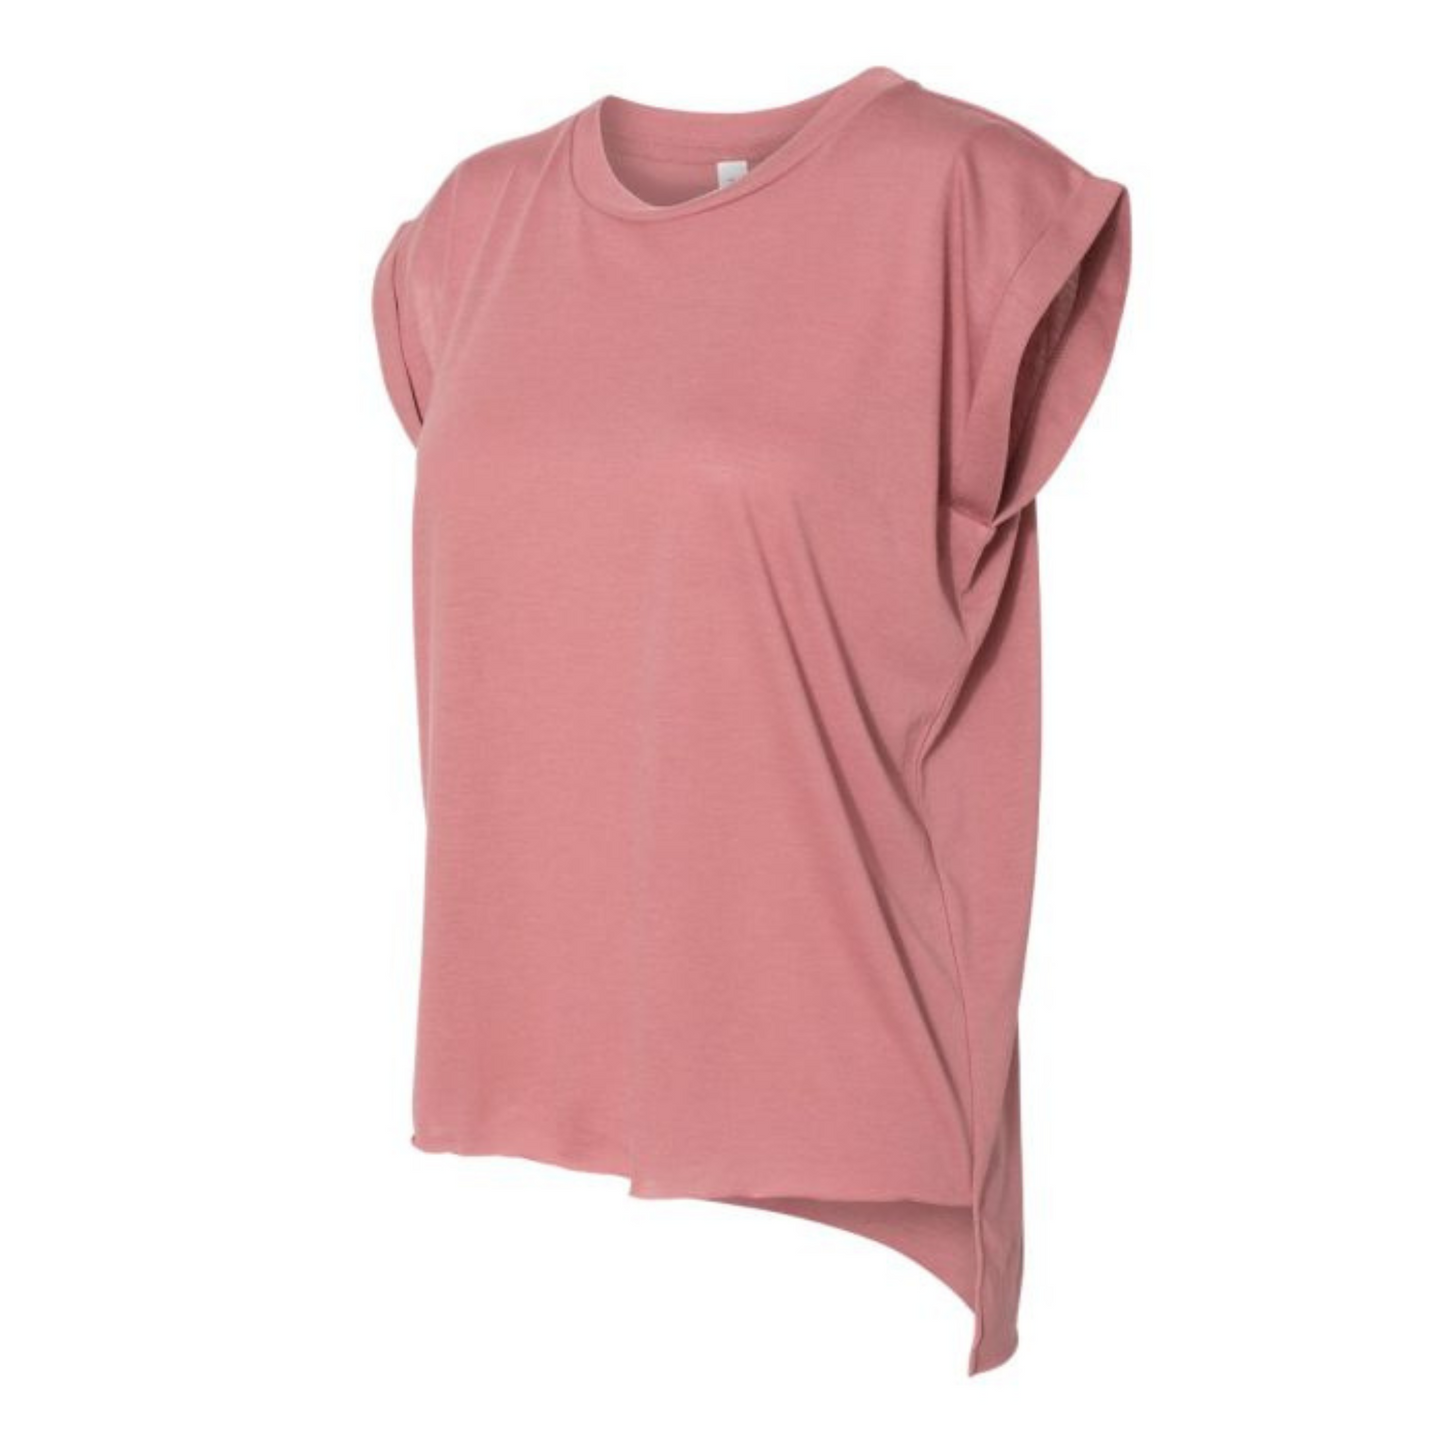 Ladies Flowy Muscle Tee with Rolled Cuff - Mauve